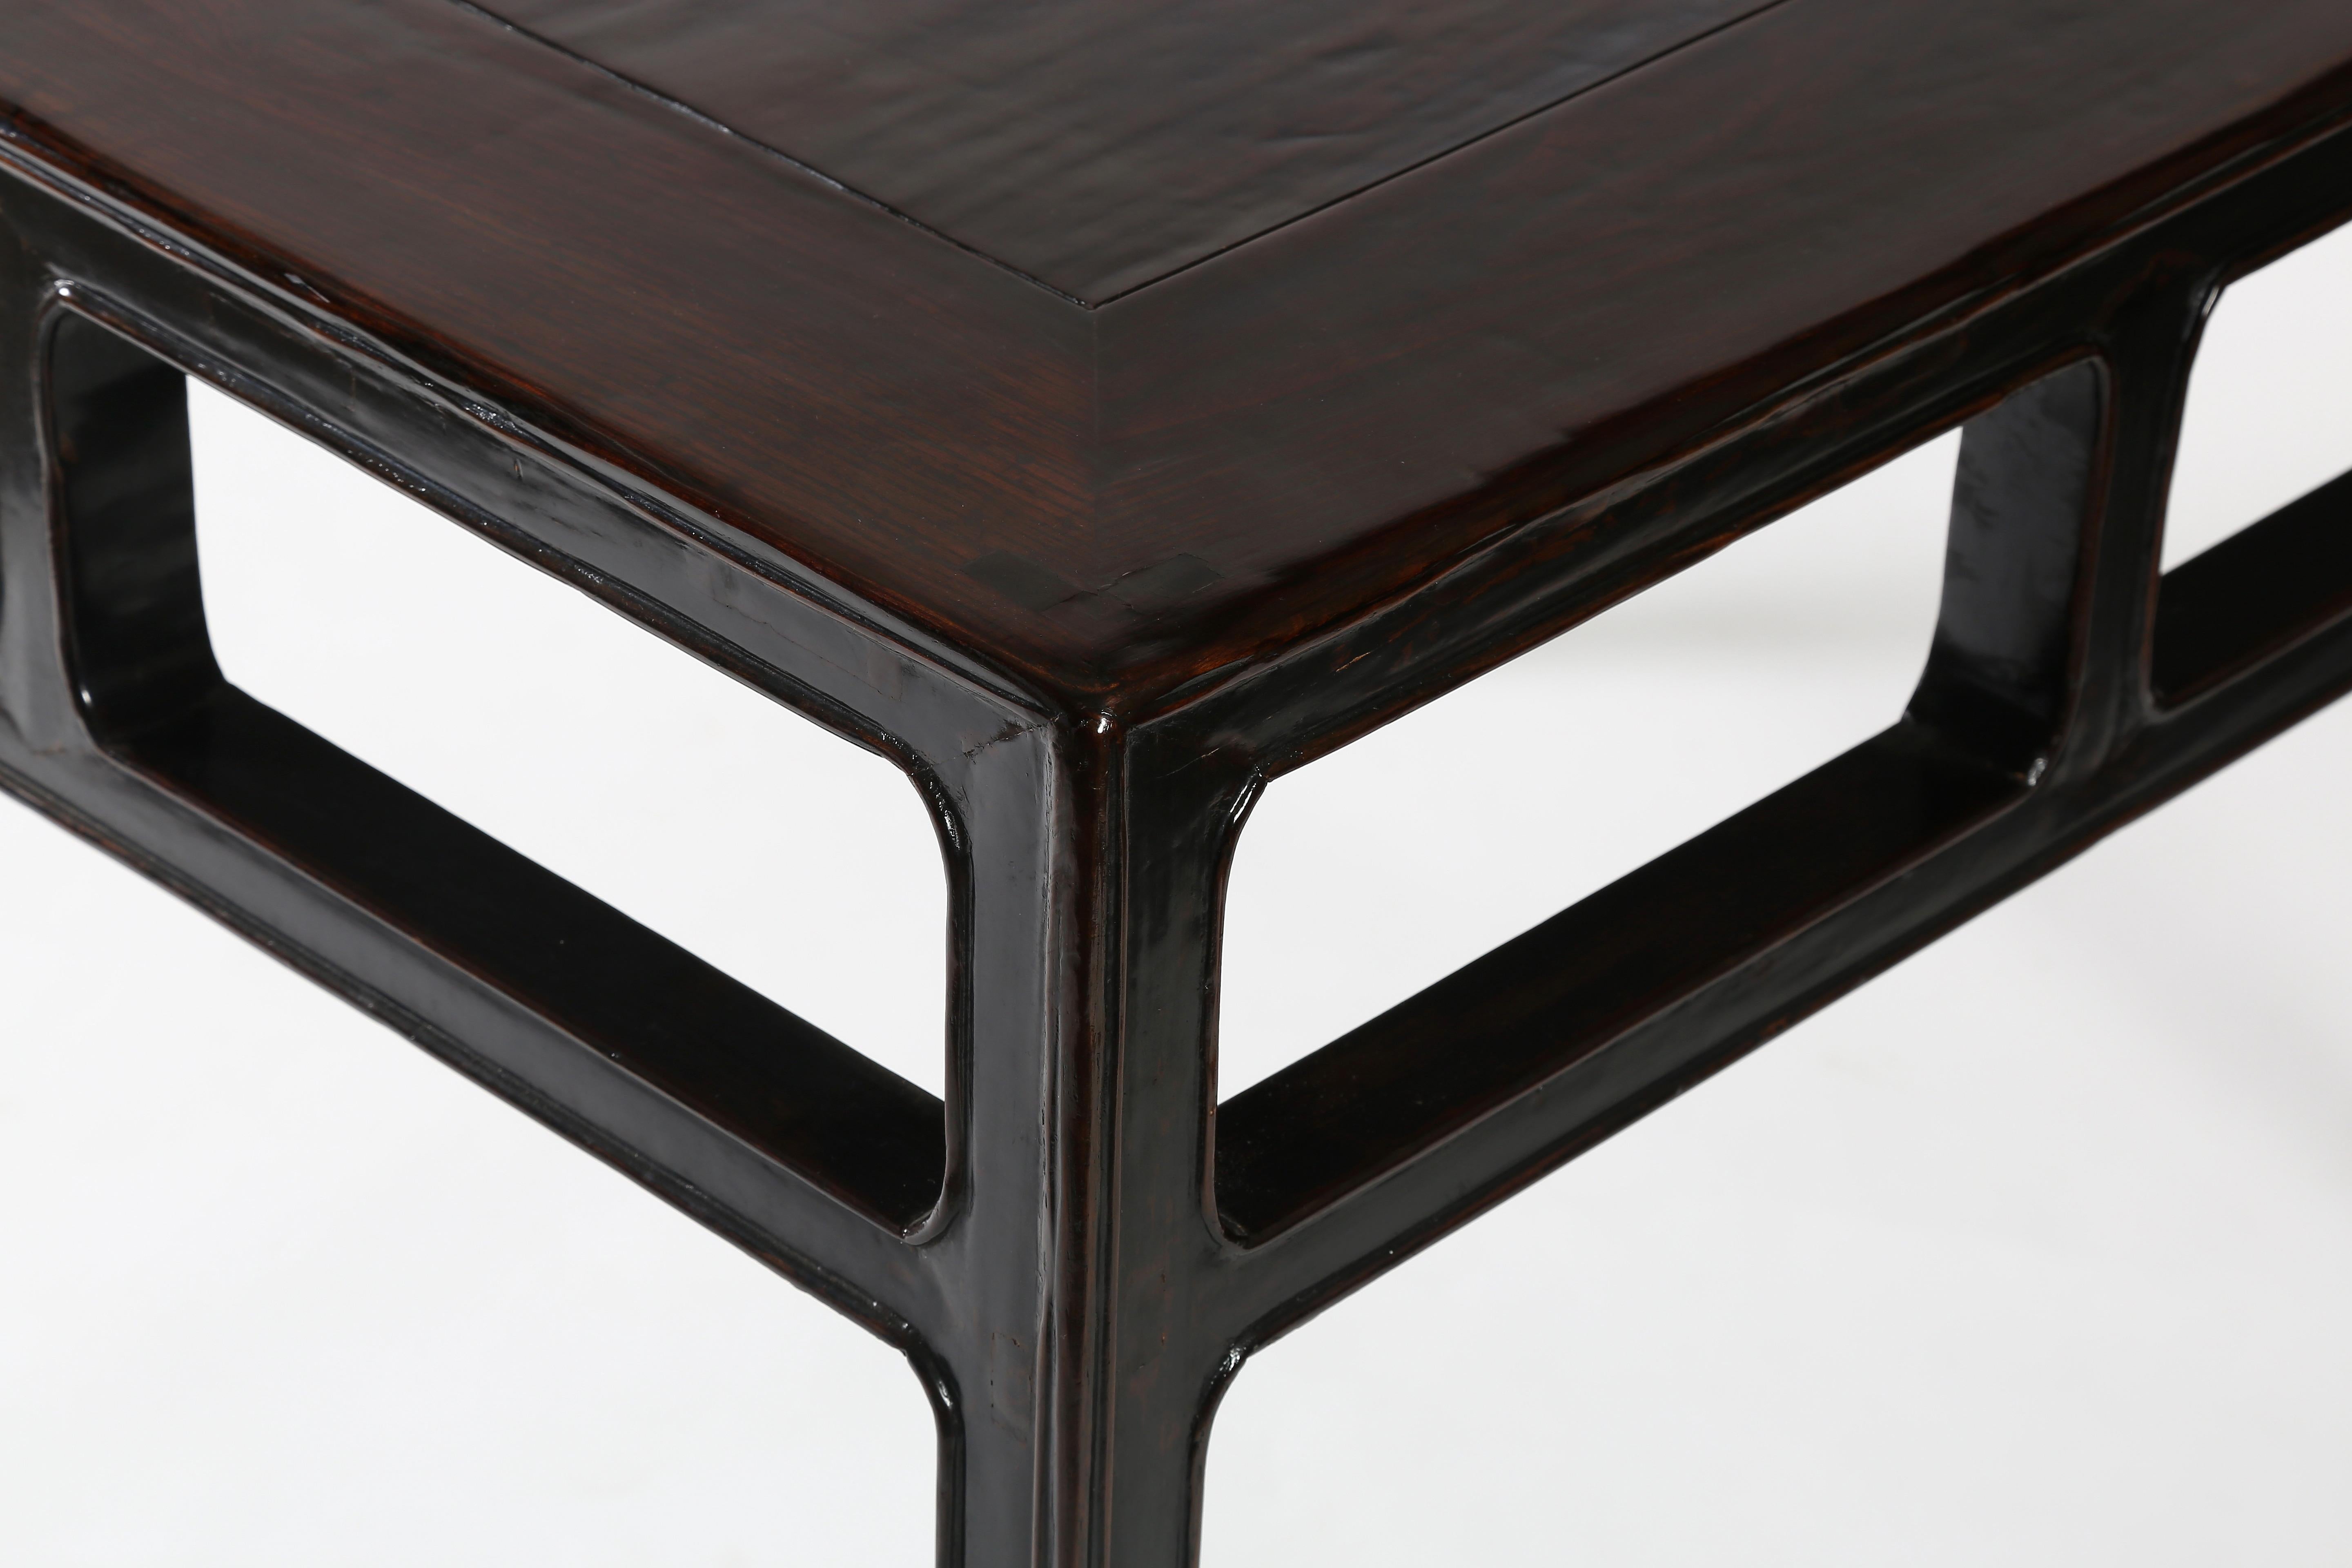 The fine square table is topped with a floating panel, enclosed within a flush sided frame, supported on square-sectioned corner legs, braced with straight stretchers and vertical struts forming rounded corner rectangular openings. The straight legs